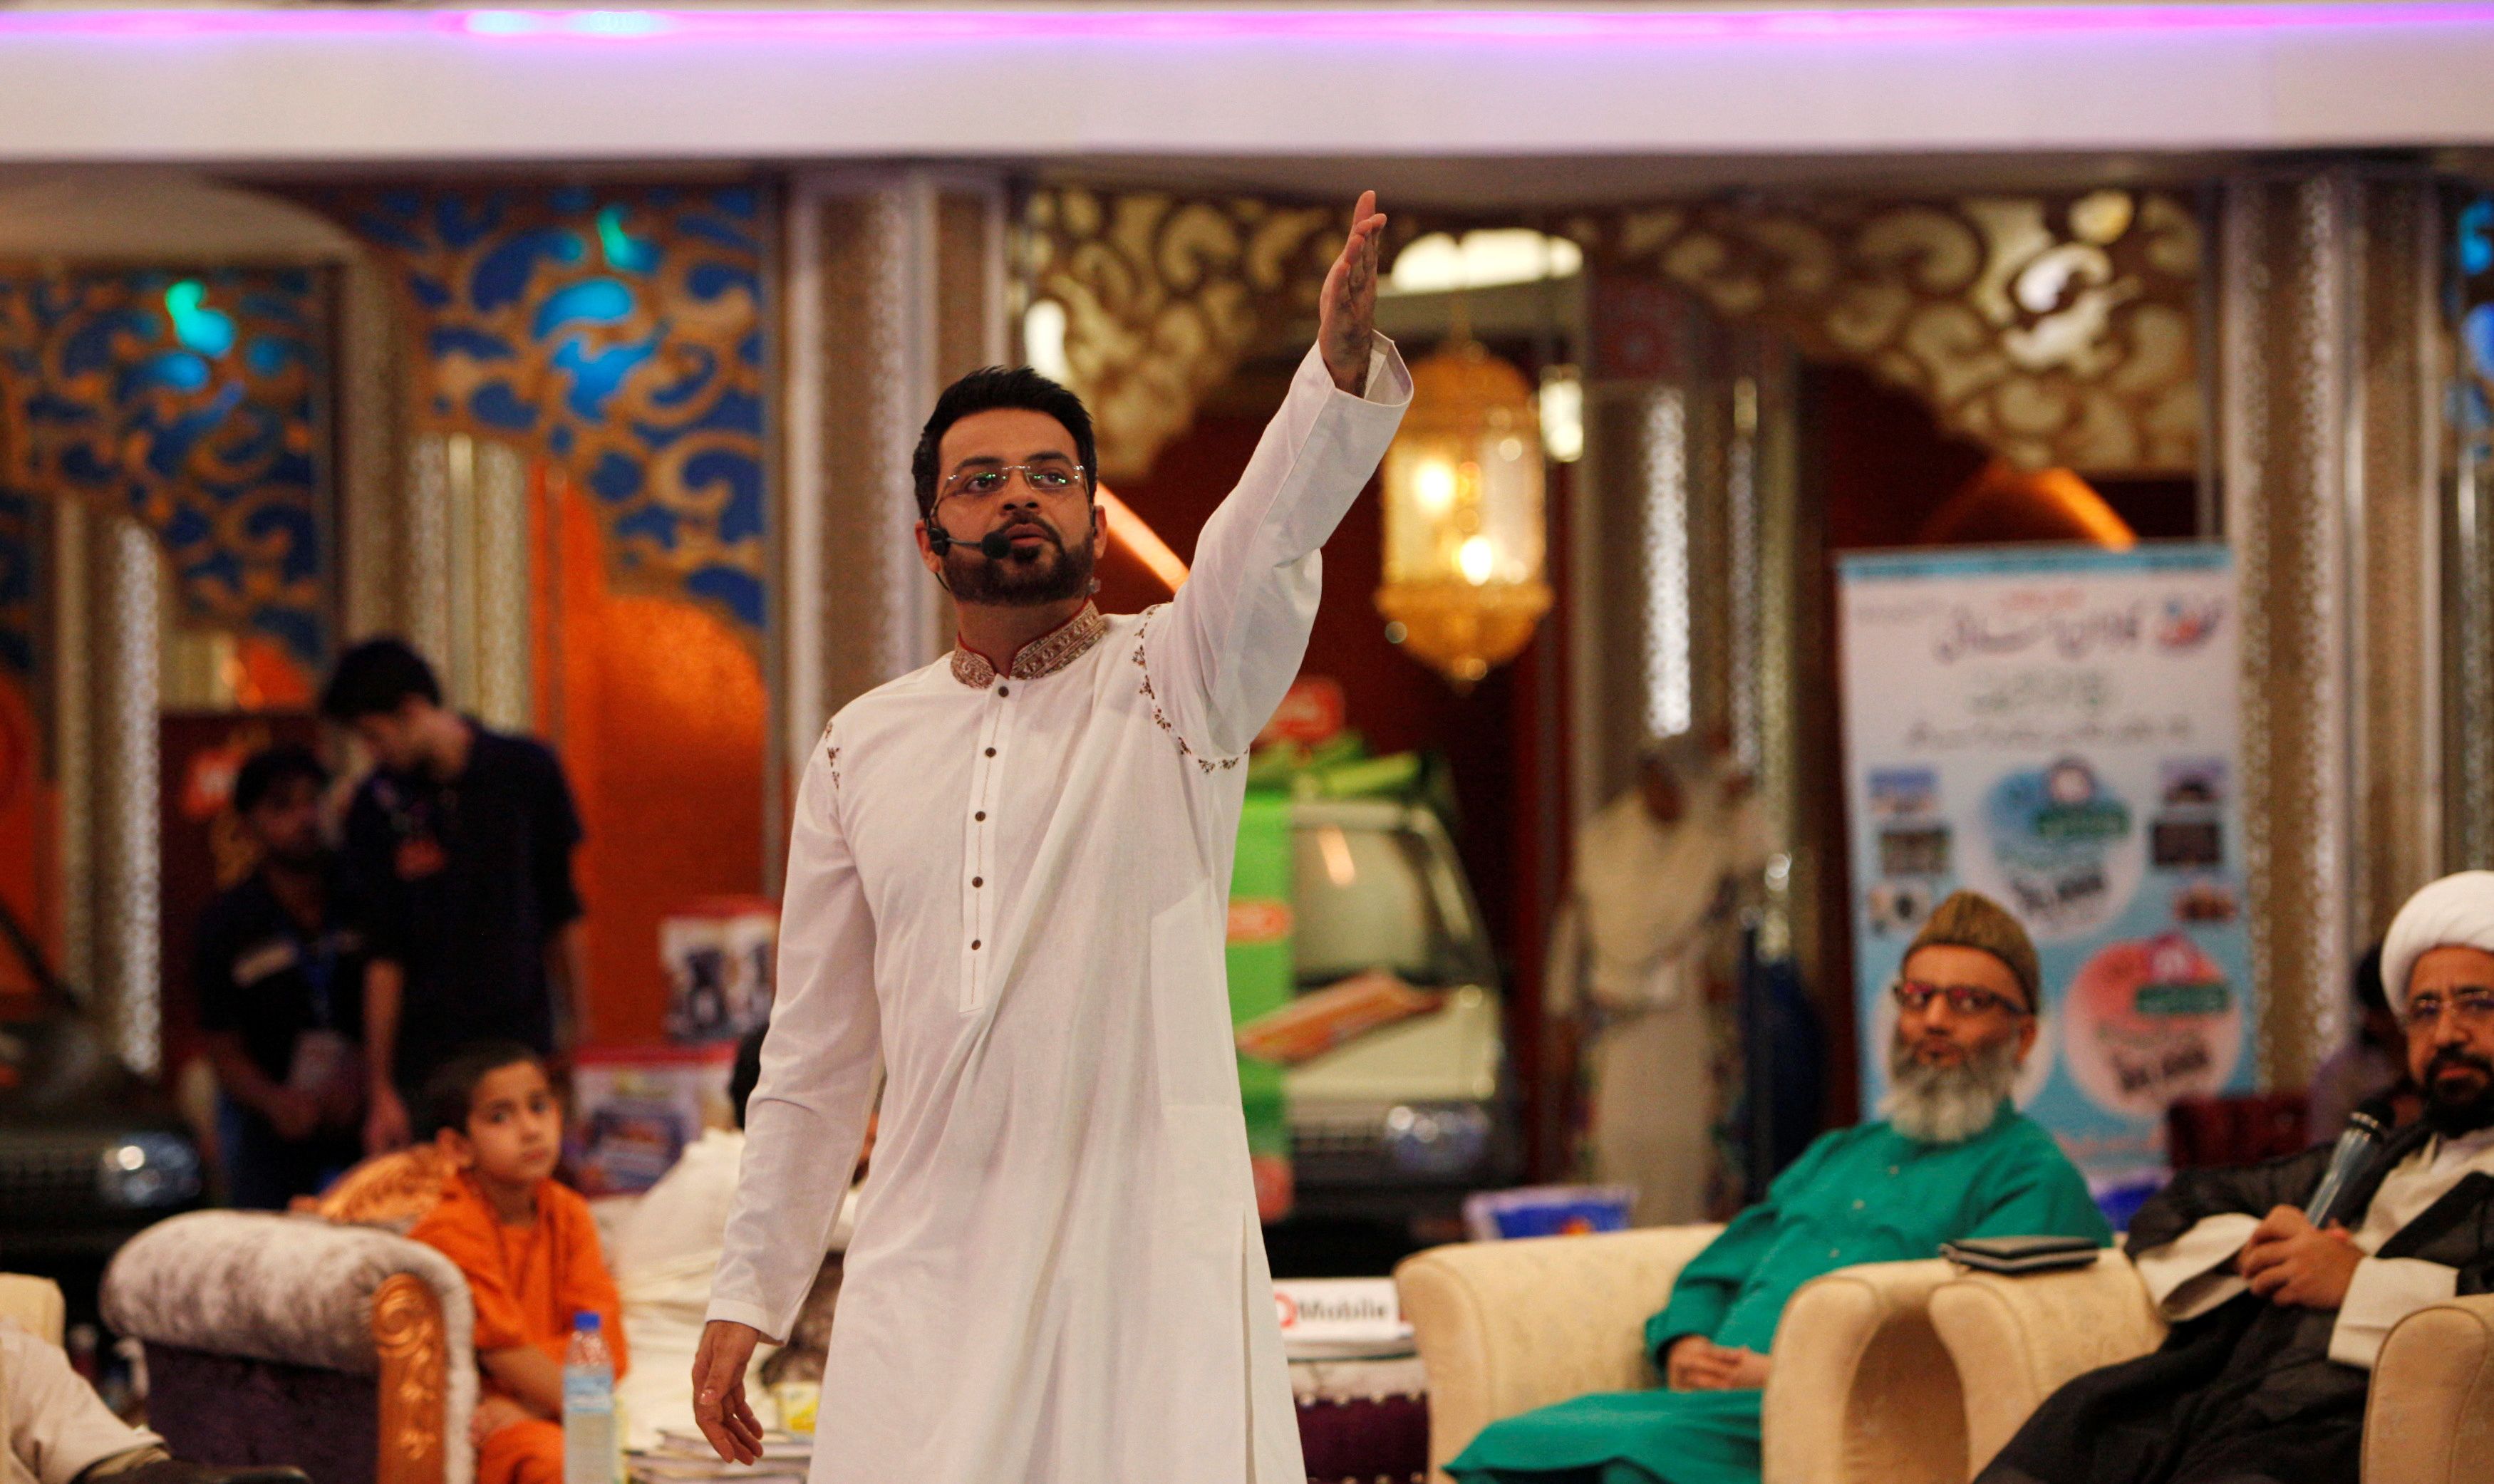 Hussain, host of the Geo TV channel programme "Amaan Ramazan", gestures during a live show in Karachi